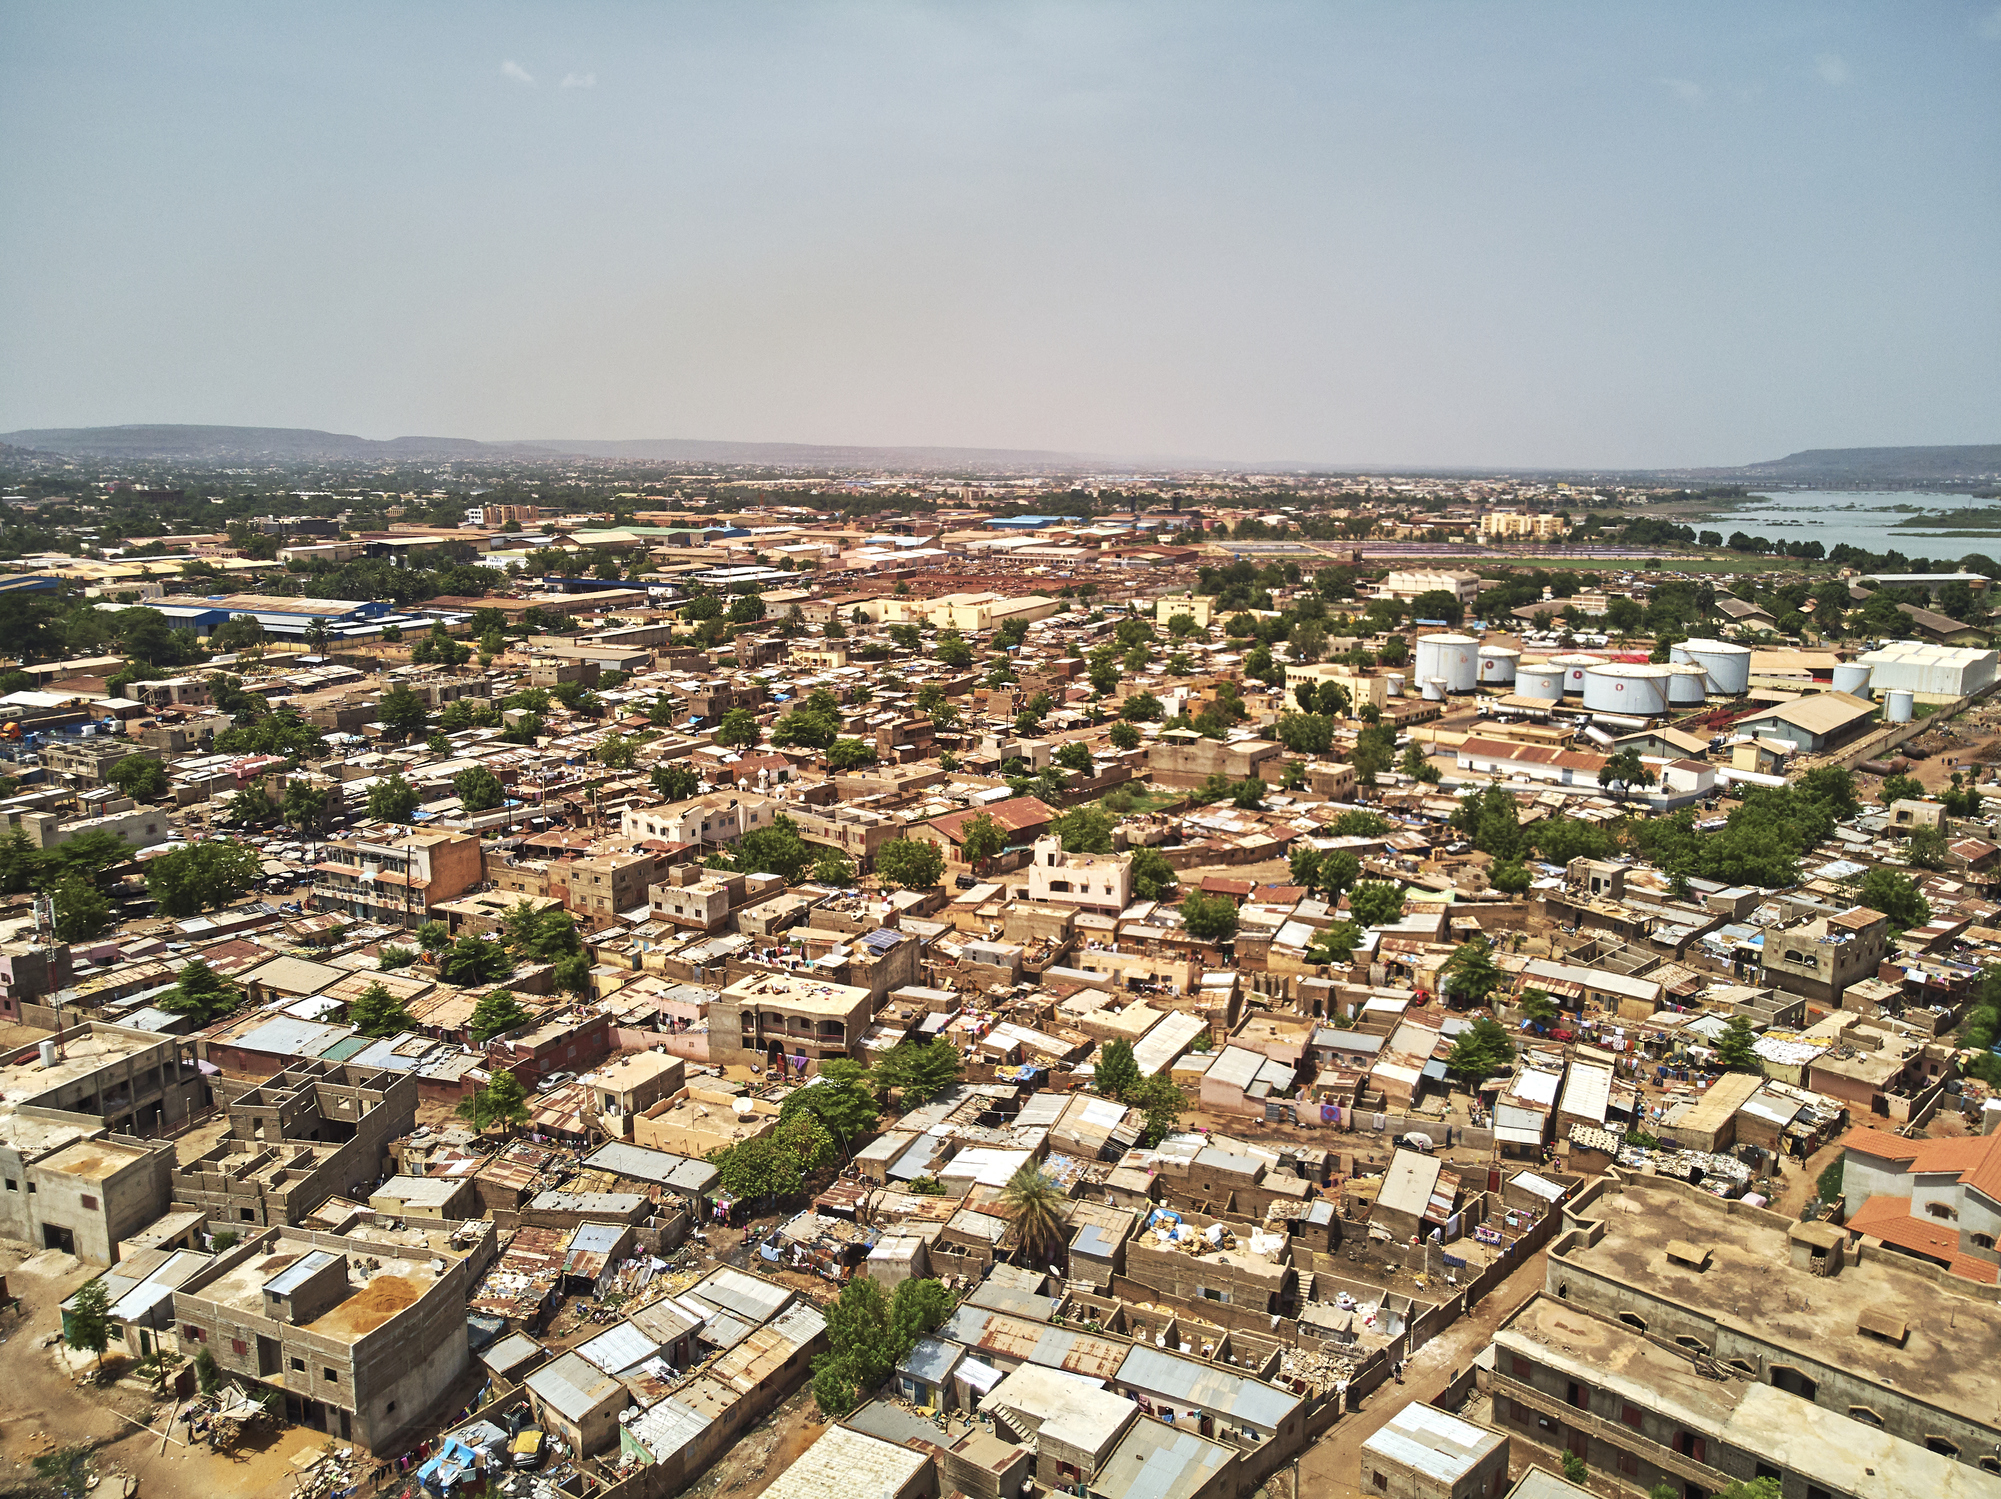 Bamako, the capital and largest city of Mali (Getty Images)